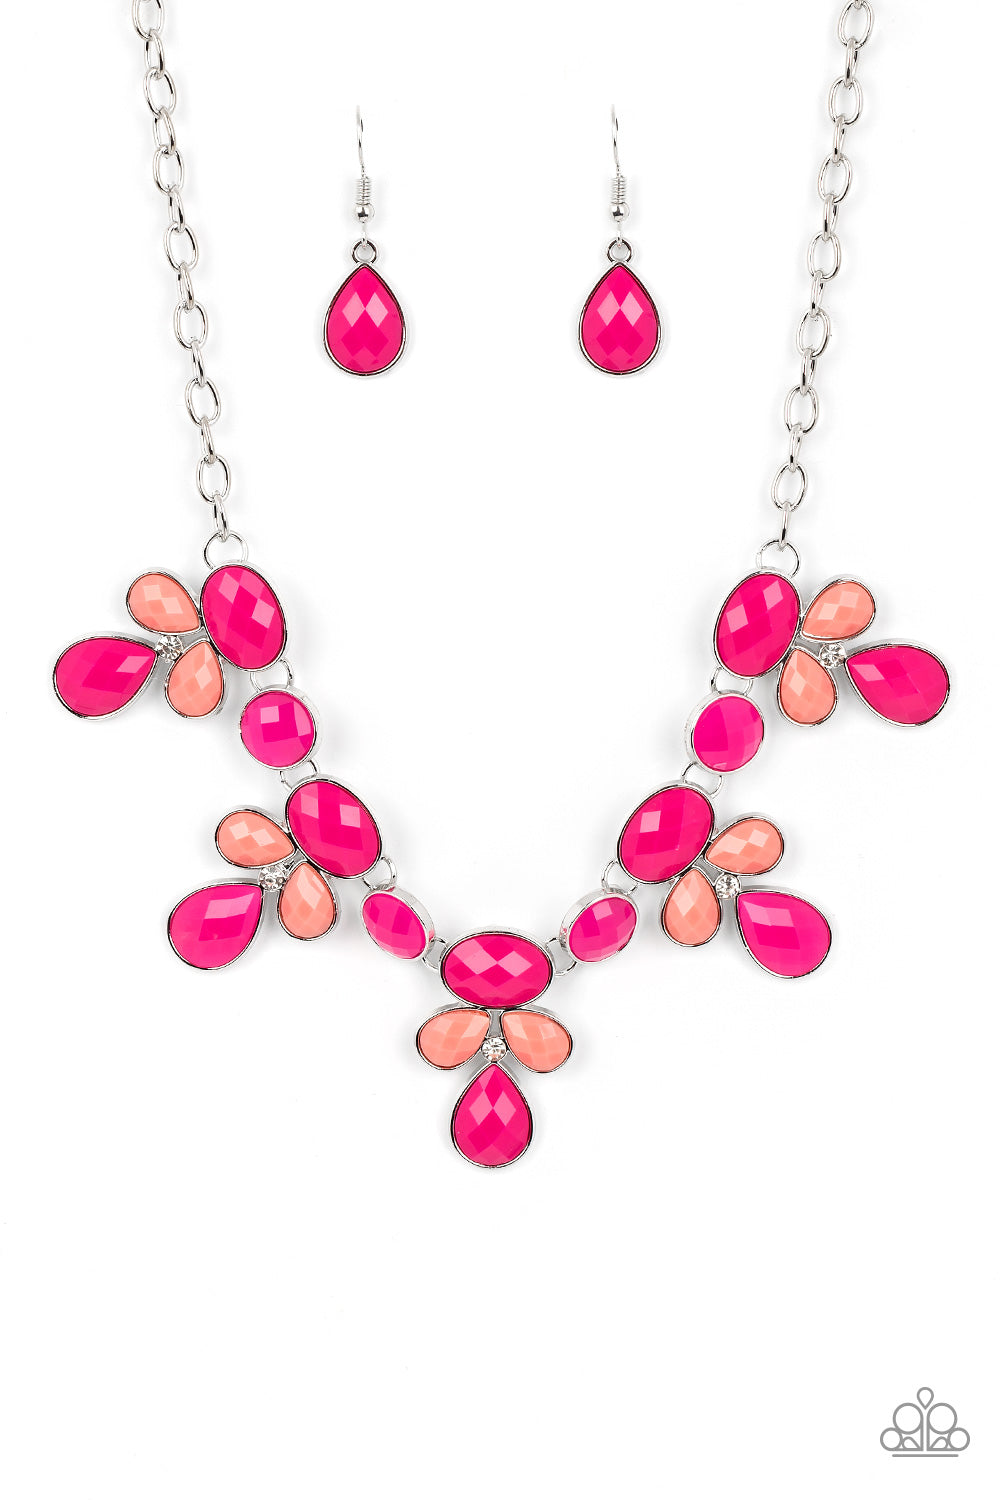 Paparazzi Accessories - Midsummer Meadow - Pink Necklaces featuring dizzying faceted finishes, a collection of oval, round, and teardrop shaped beads in vibrant shades of coral and Pink Peacock cluster into colorful frames around dainty white rhinestones. The whimsical frames connect below the collar, resulting in a summery pop of color. Features an adjustable clasp closure.  Sold as one individual necklace. Includes one pair of matching earrings.